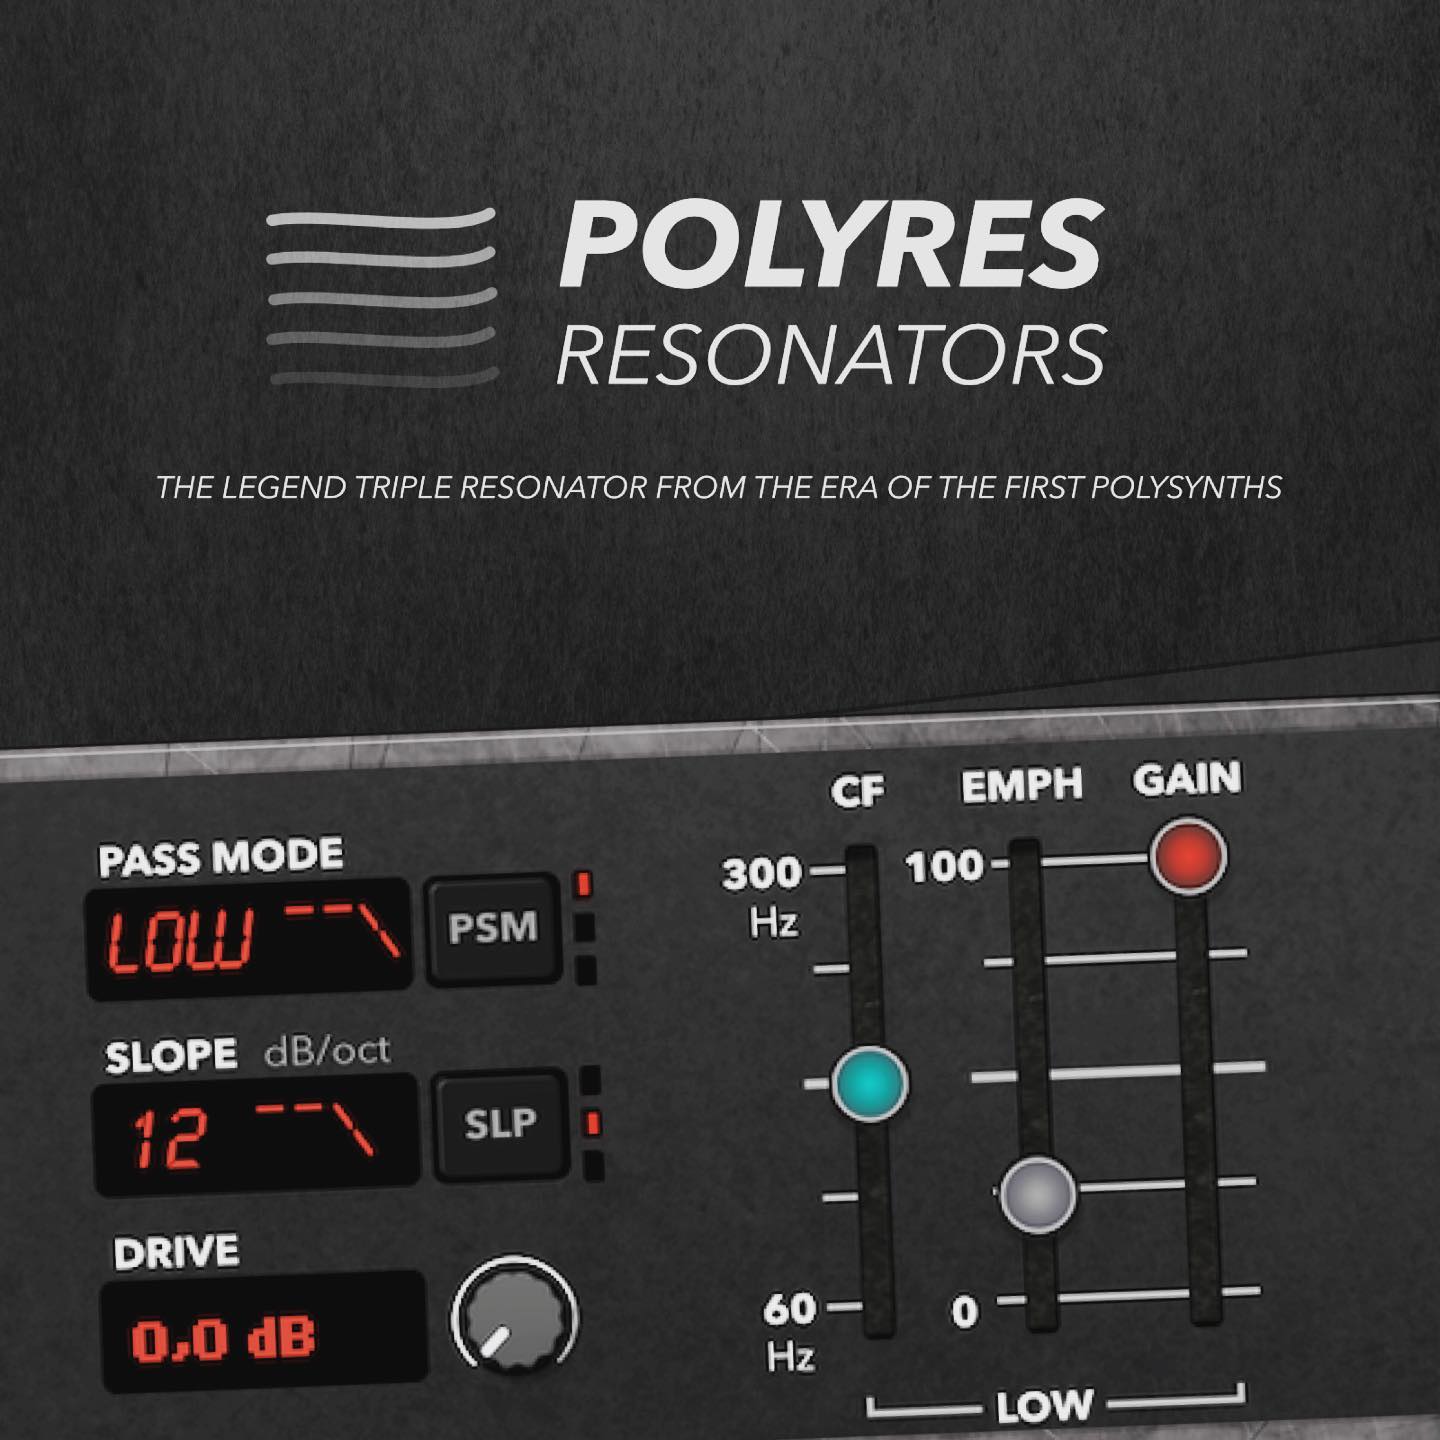 #POLYRES resonator is a emulation of the Resonators section of #Polymoog synthesizer. 
POLYRES update v 1.1:
Dry/Wet, Dry, Wet knobs
Output level
Drive (overdrive with comp)
Slope mode: 6 db/oct
CV Trims inputs
GUI changes #turn2on #reason #reasonstudio #reasonrack #polymoog #resonator #effect #polysynth #filter #band #plugin #rackextension #rackextensions